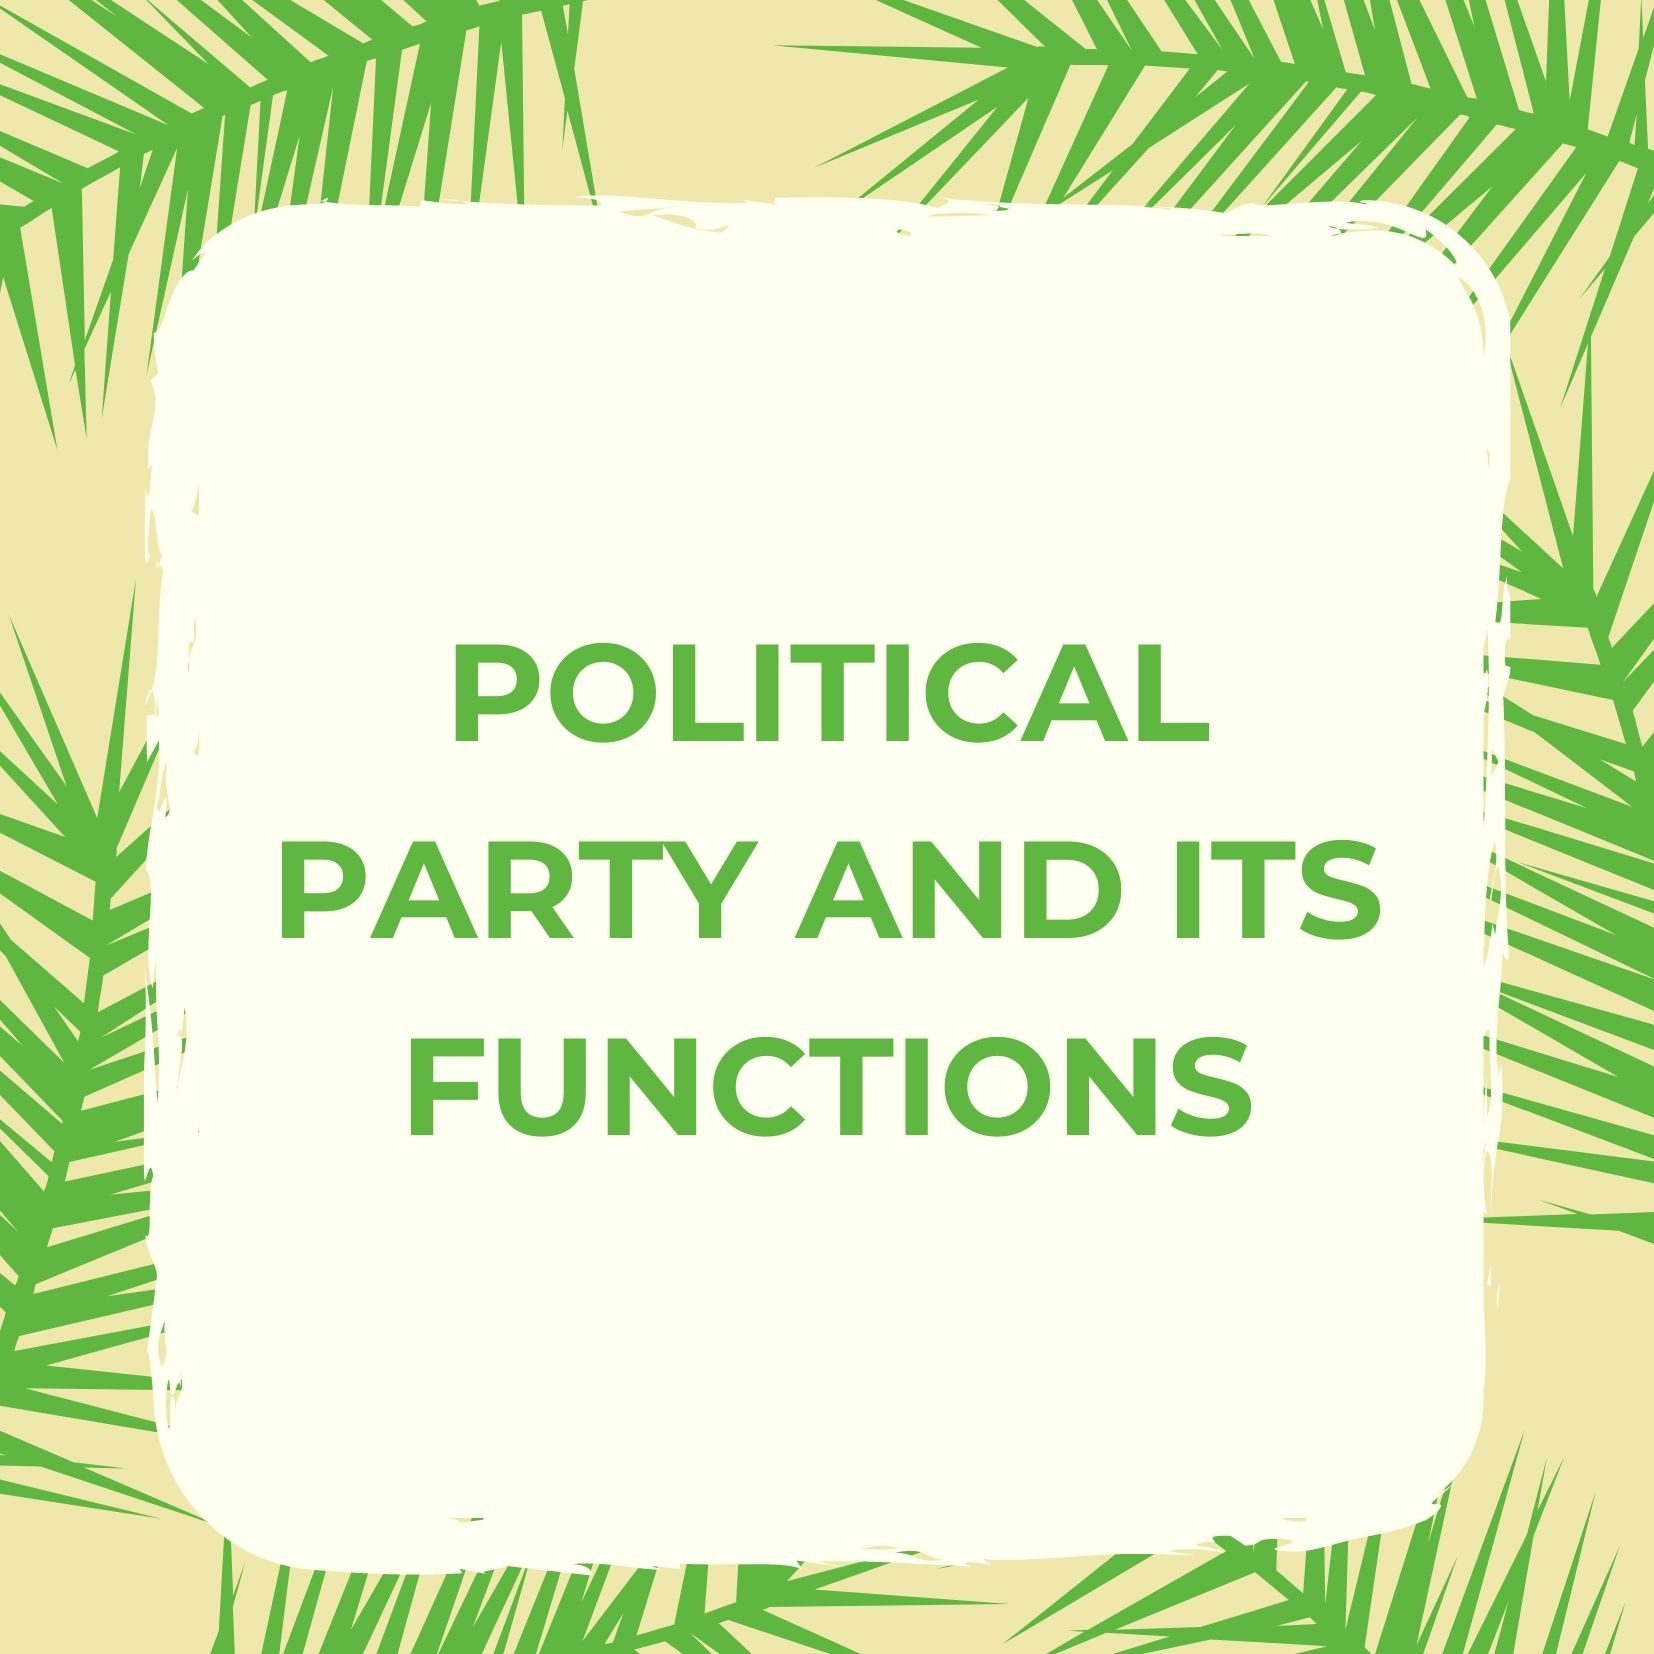 Political Party and its Functions